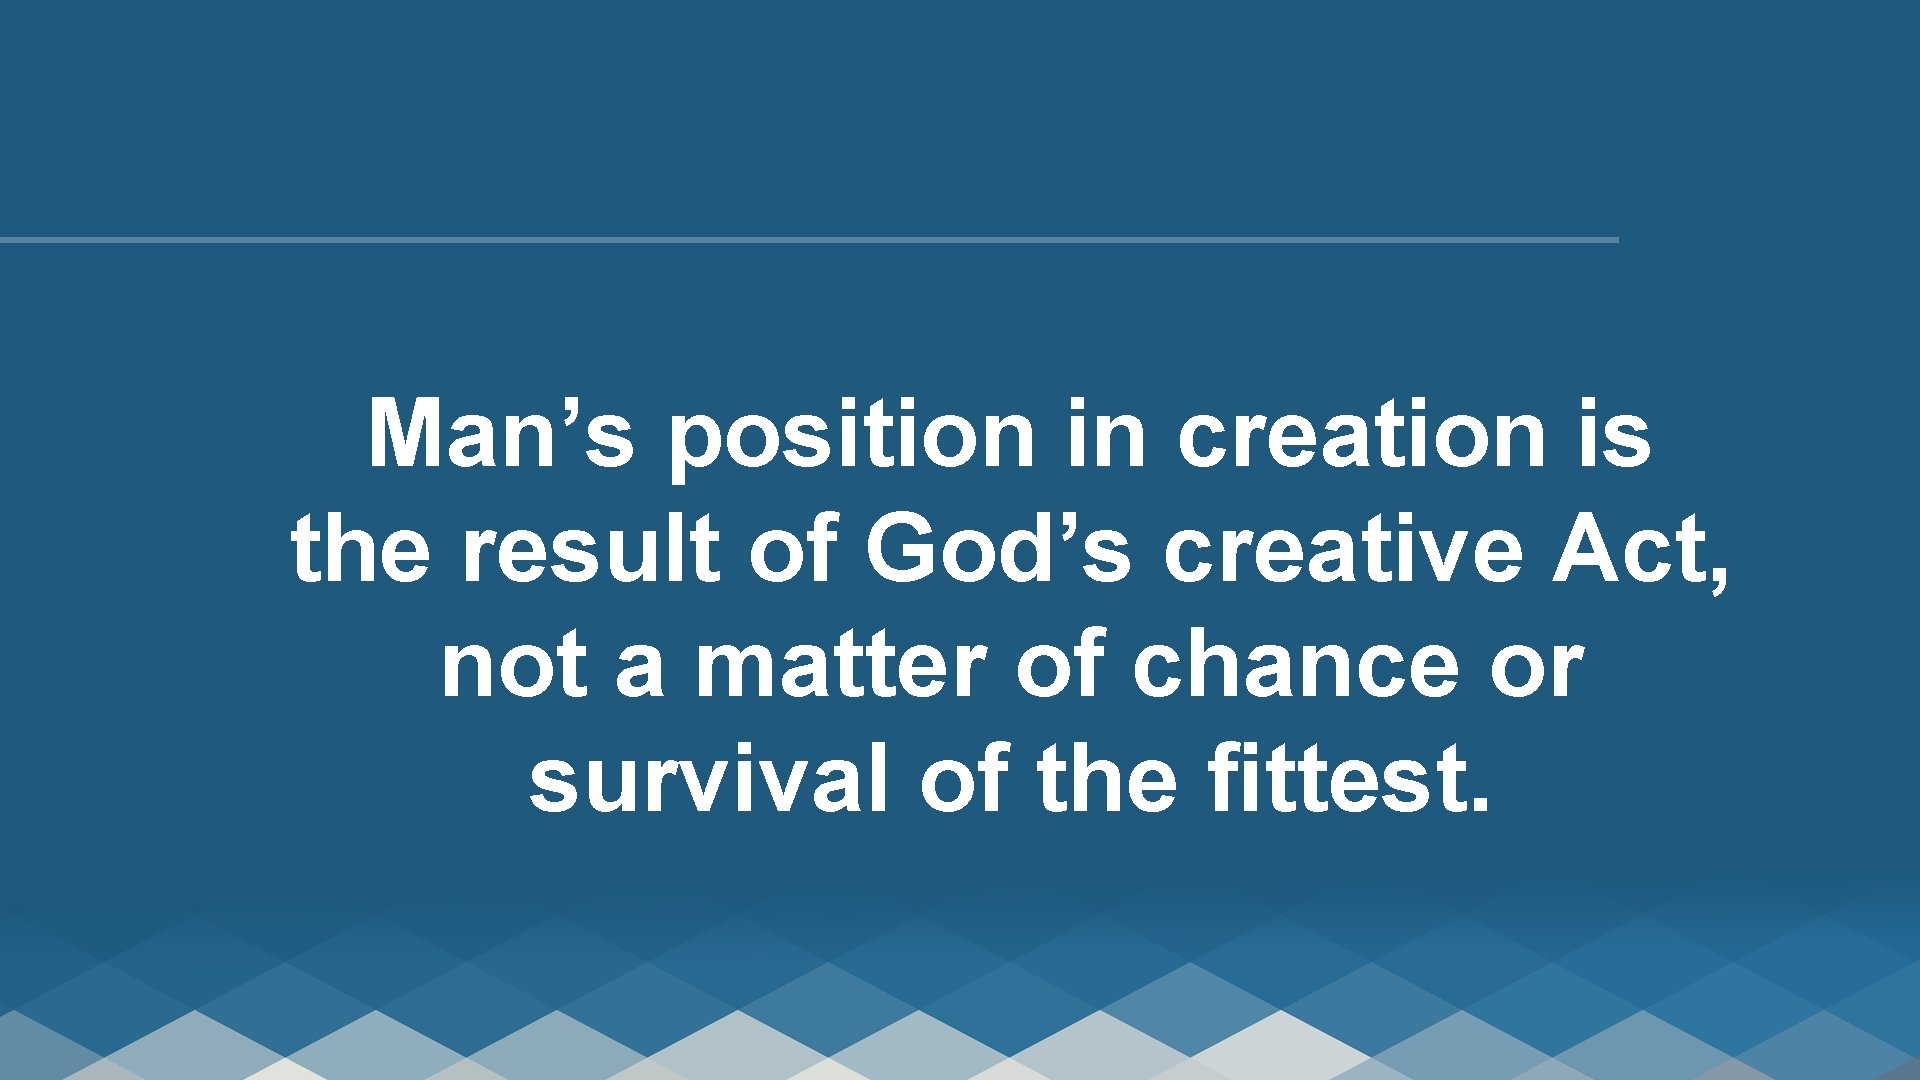 Man’s position in creation is the result of God’s creative Act, not a matter